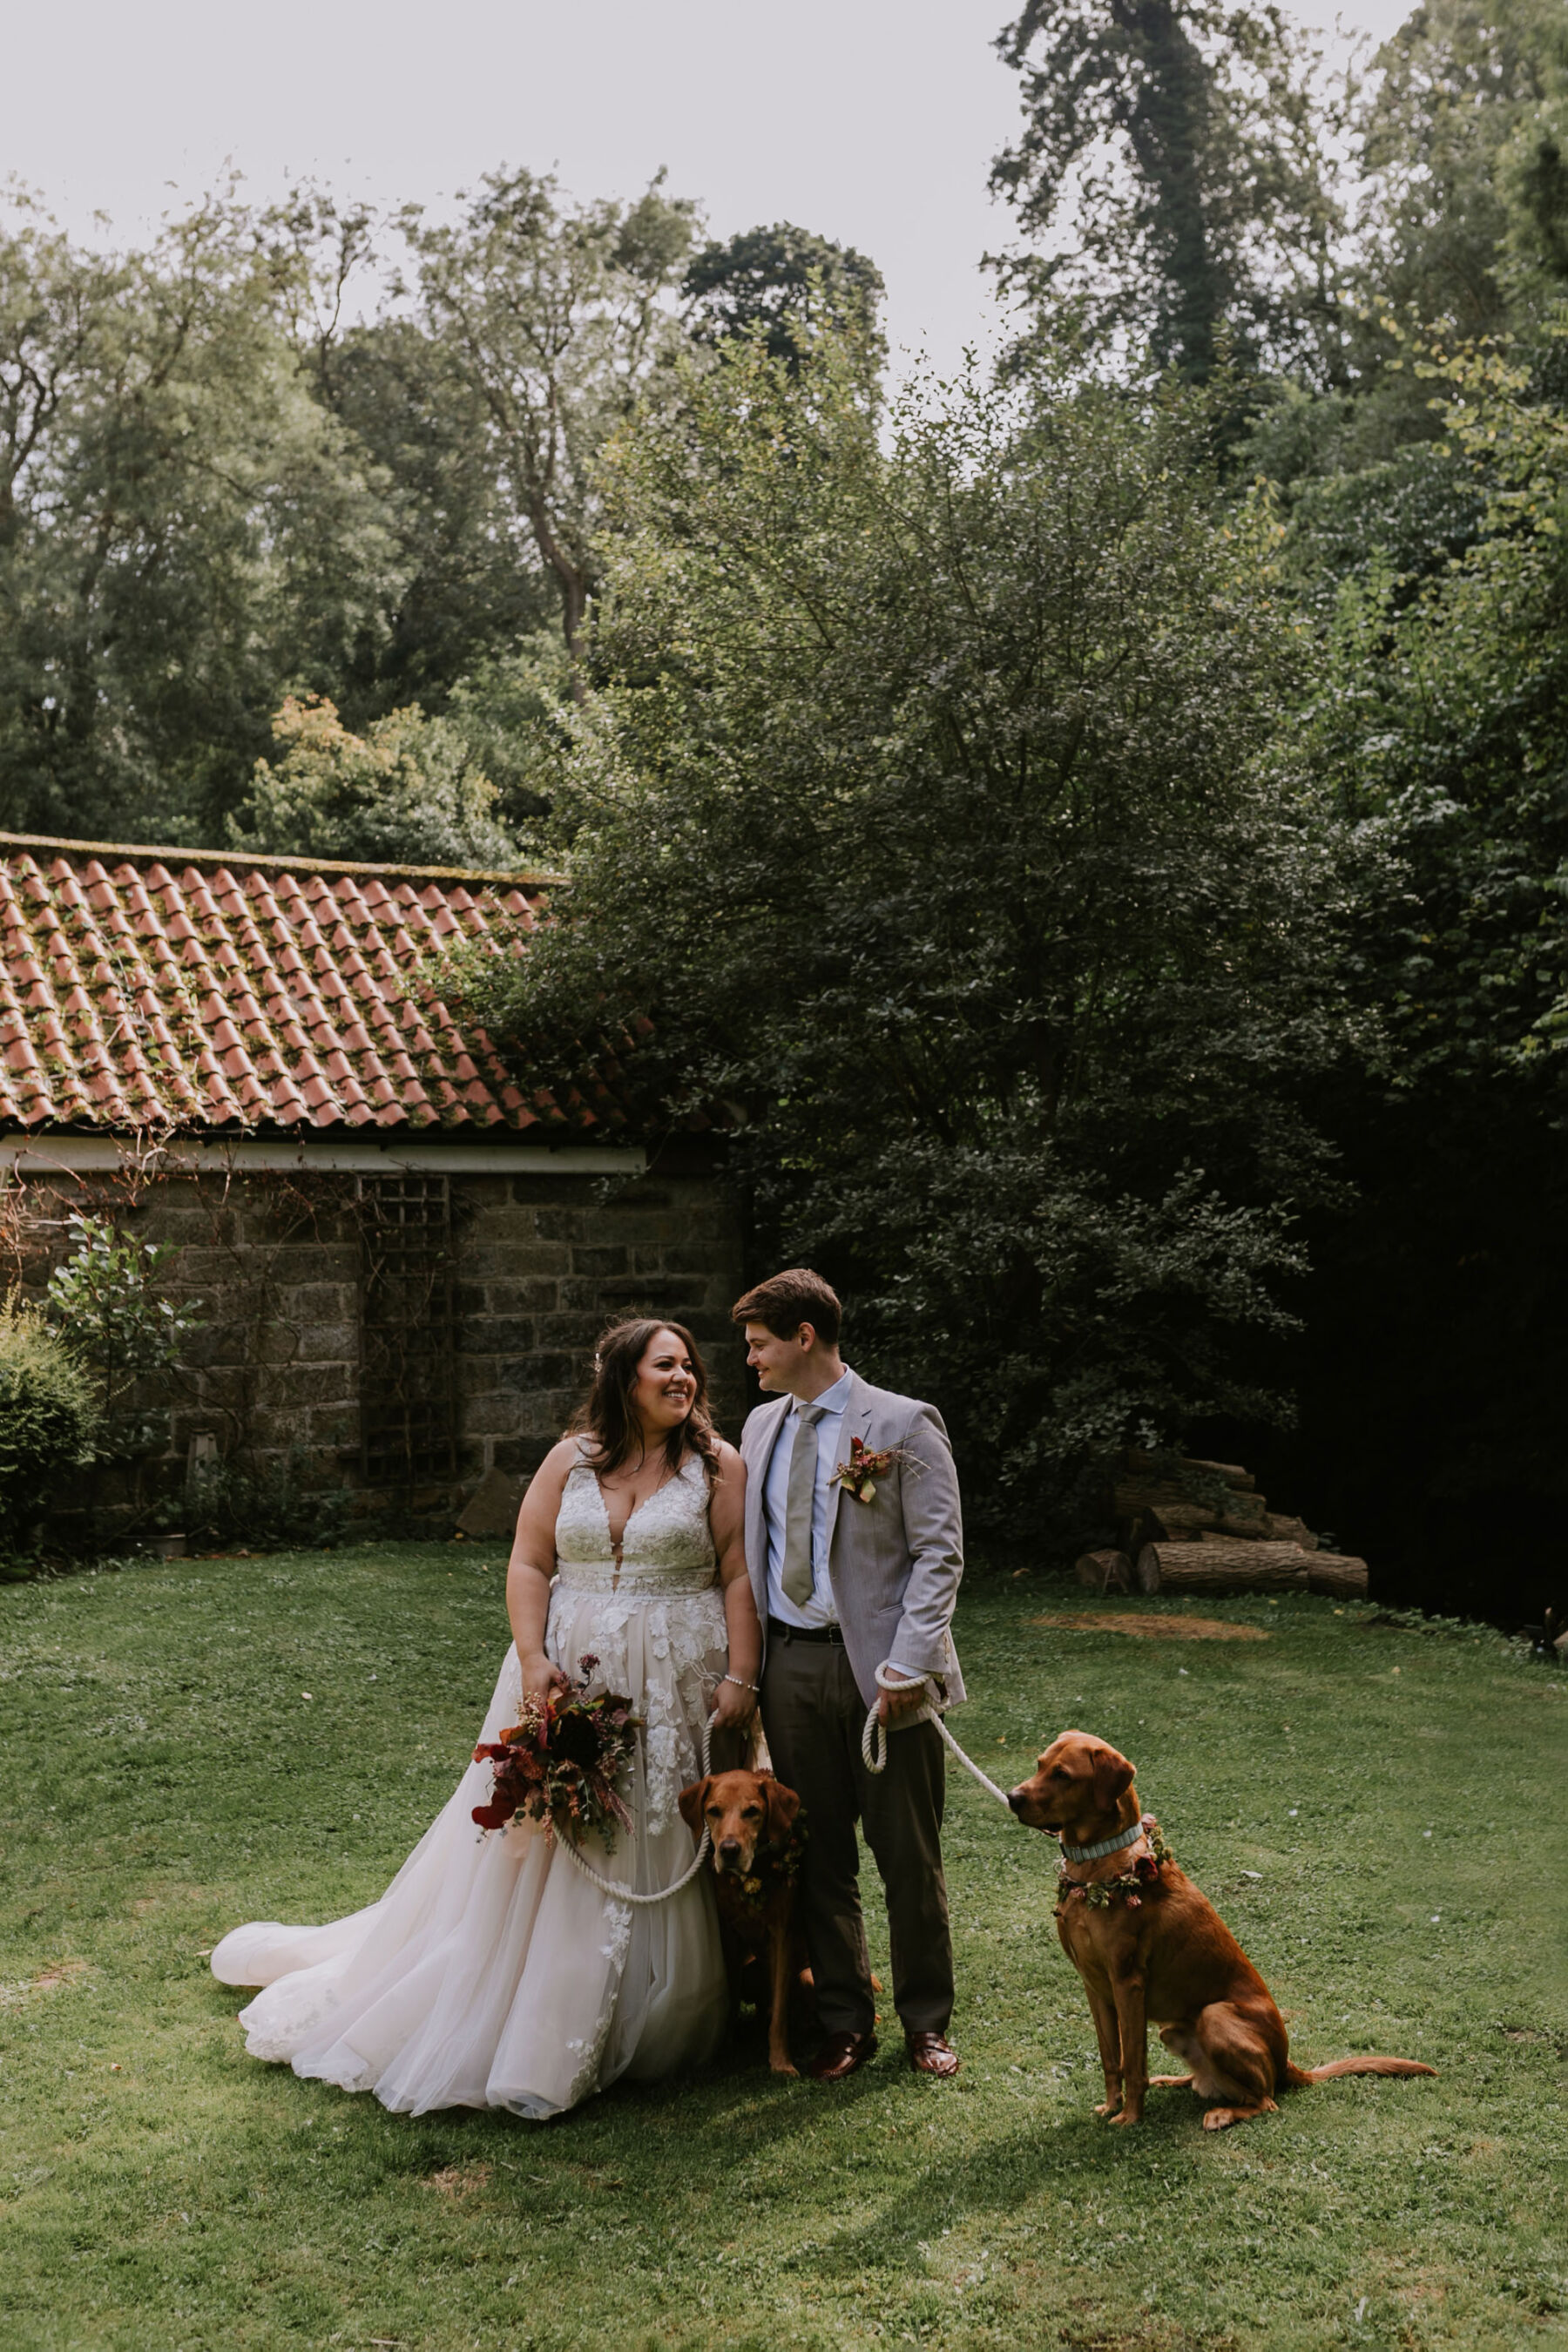 Wedding at Larpool Mill, Whitby. Bride and groom with dog - a Fox Red Labrador.